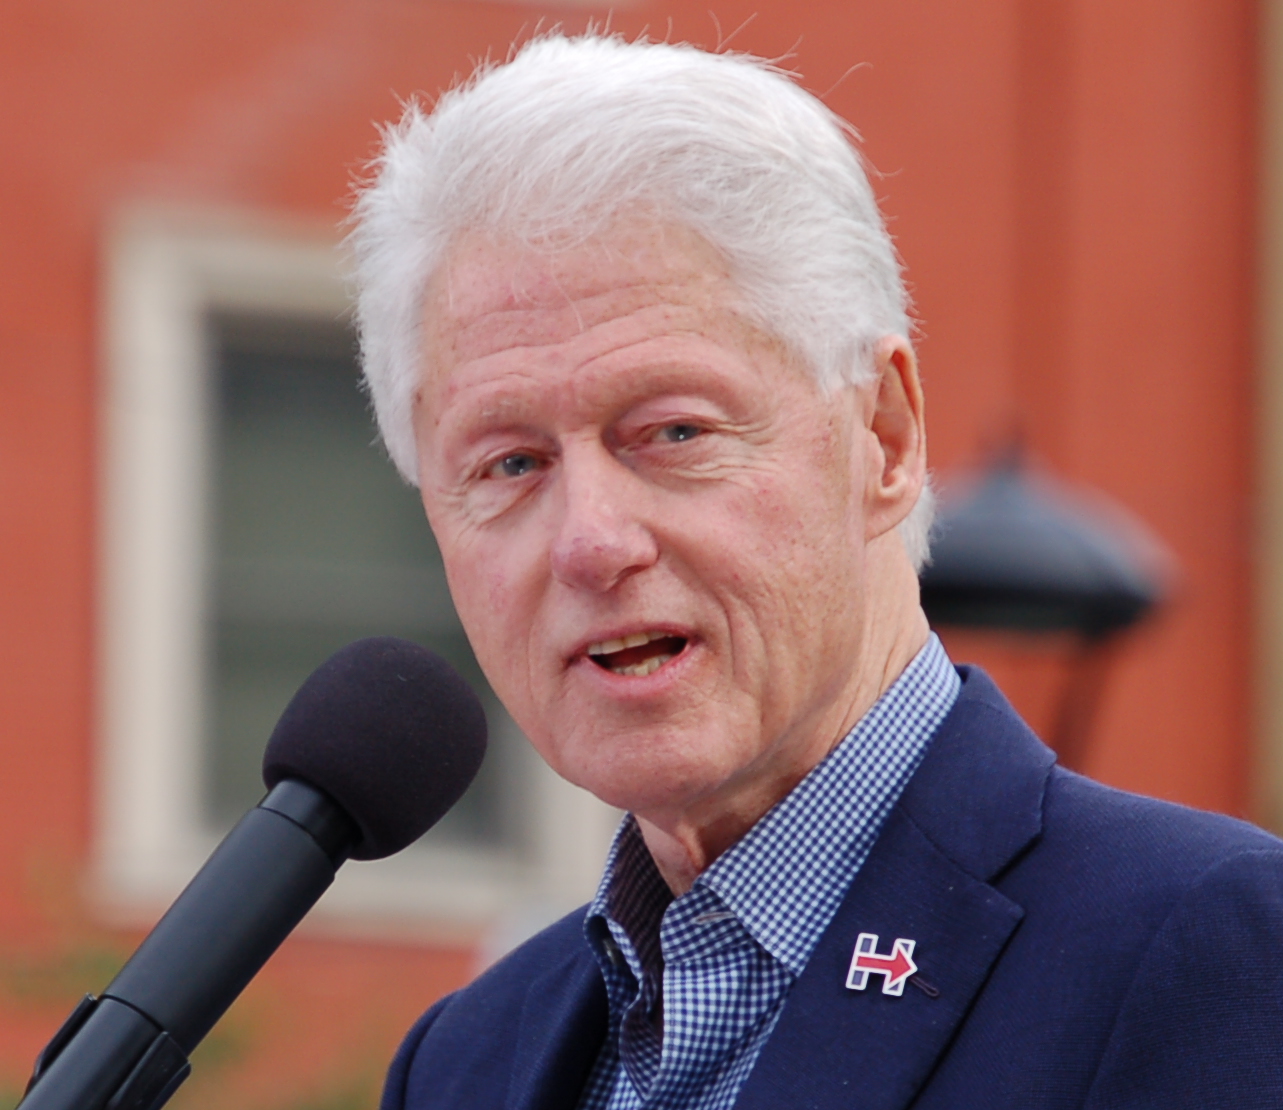 Ex-President Bill Clinton recovering in hospital from infection